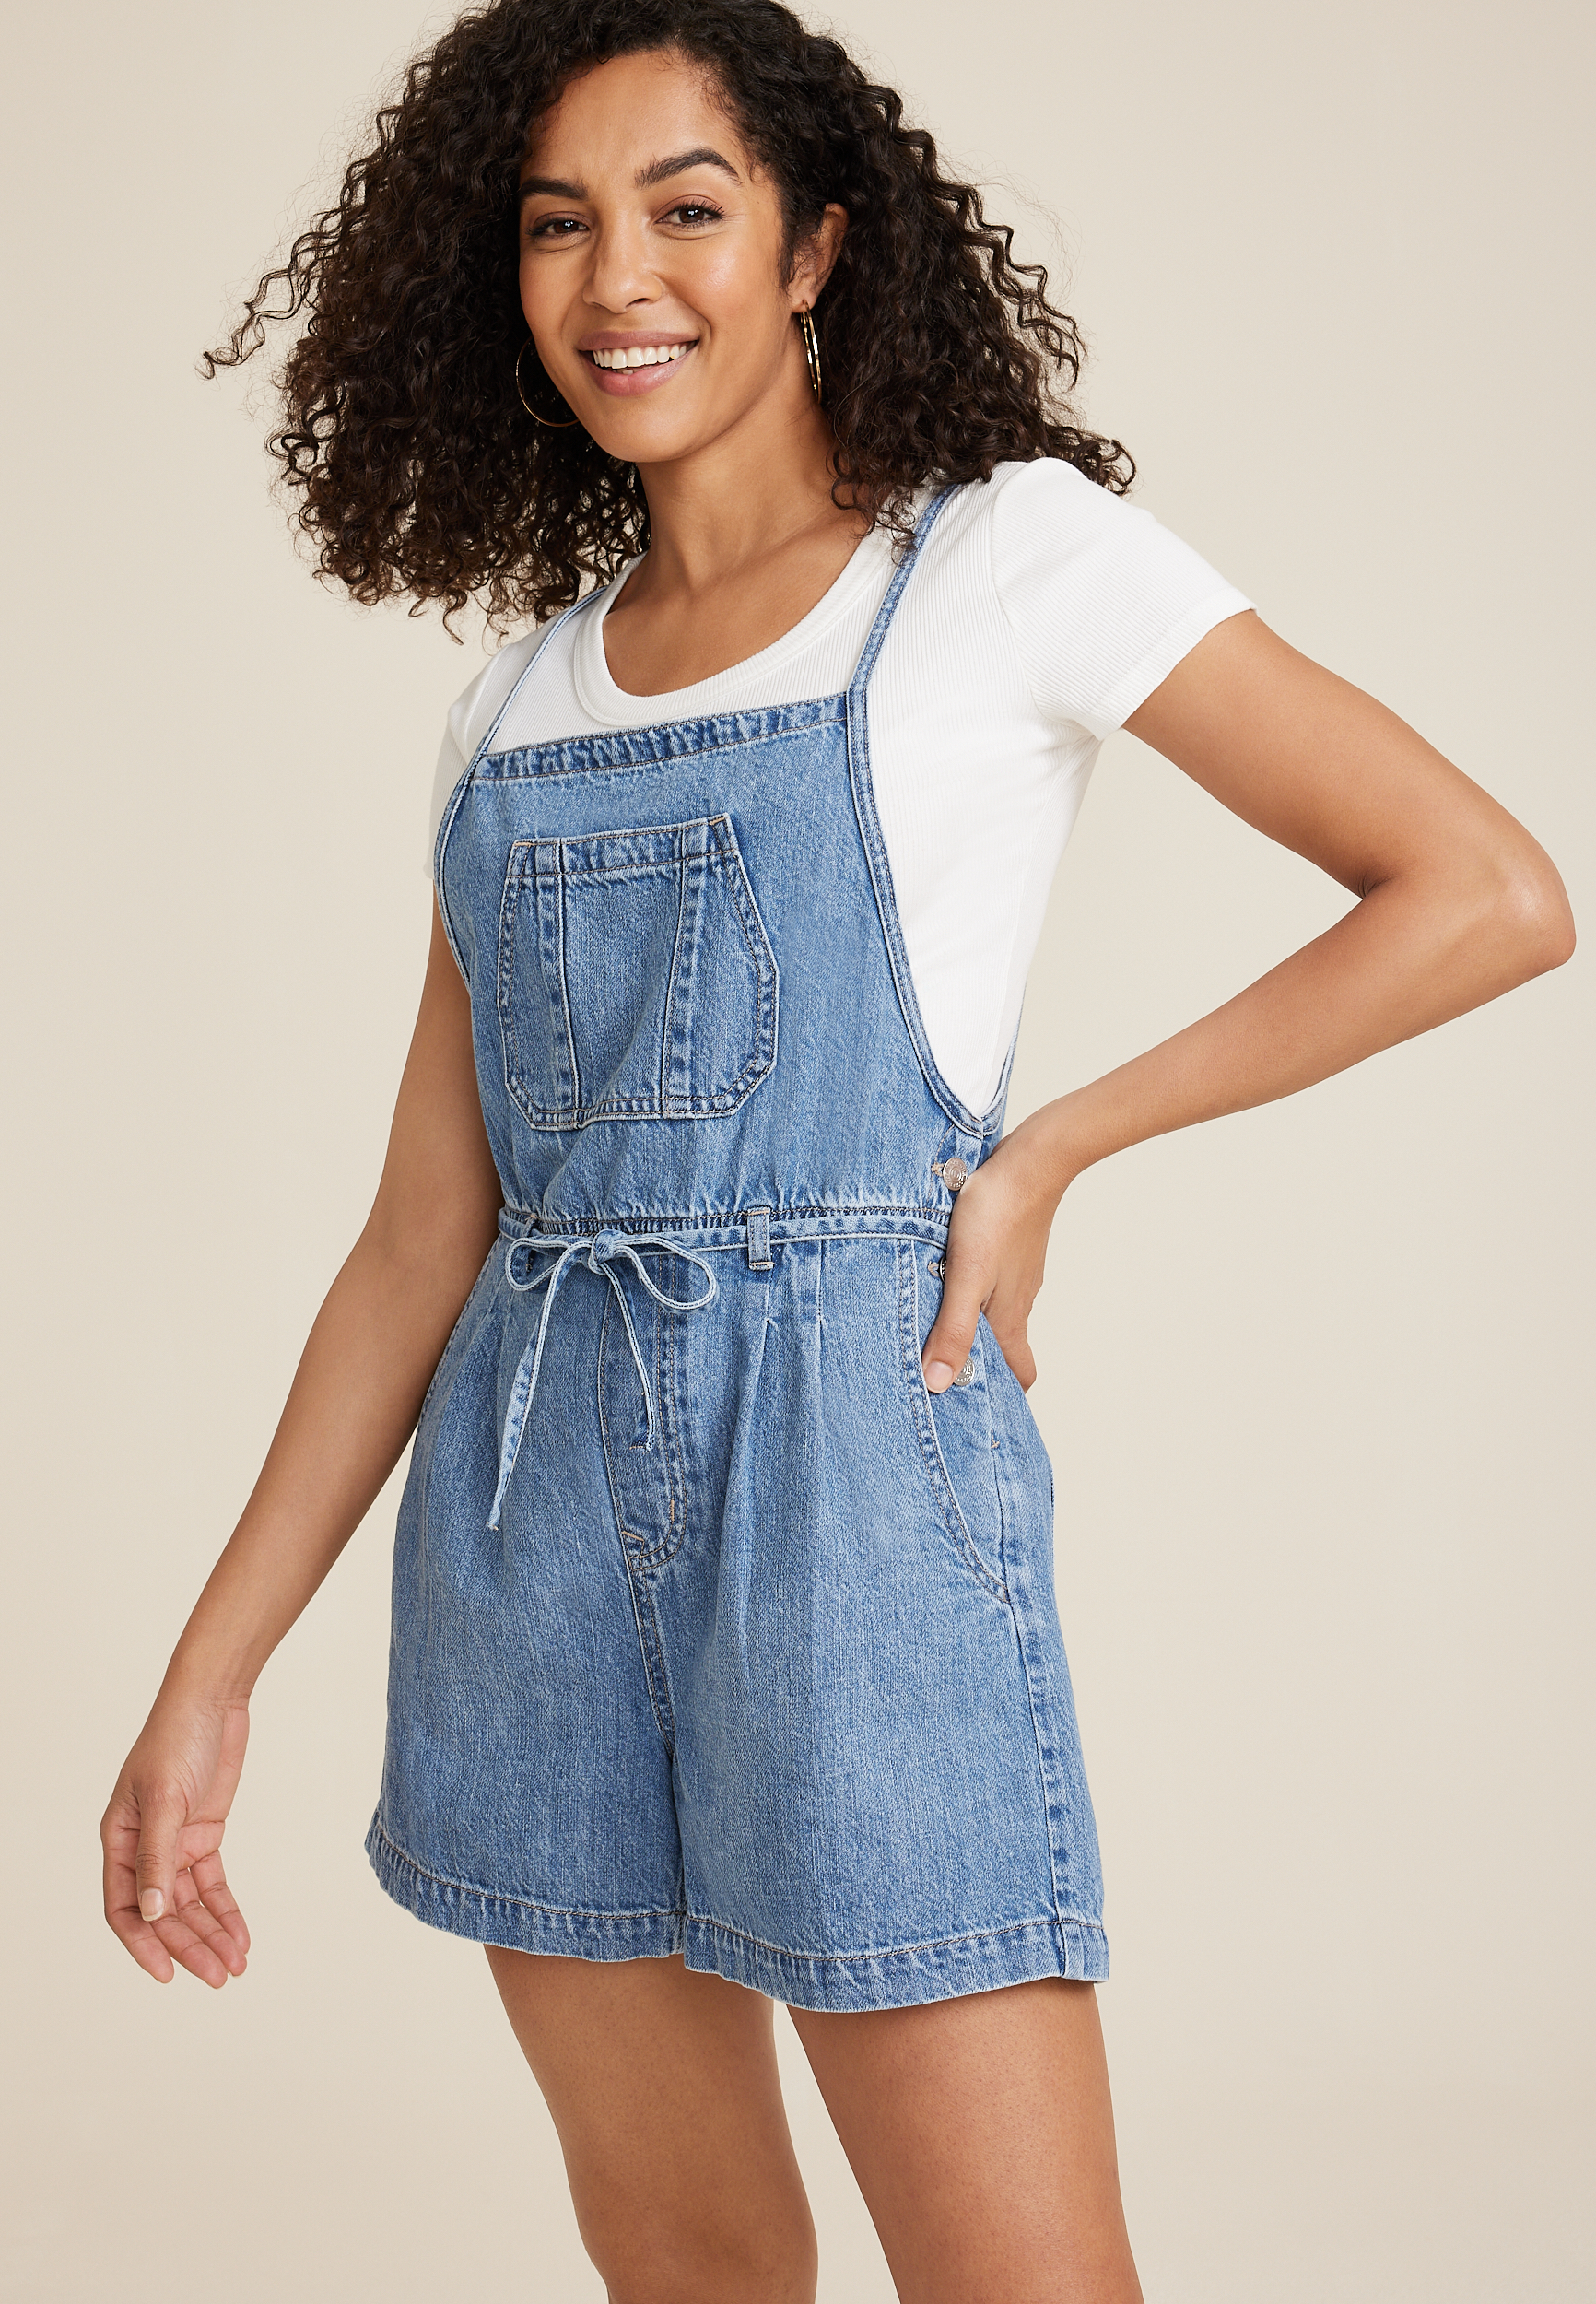 m jeans by maurices™ Soft Denim Shortall